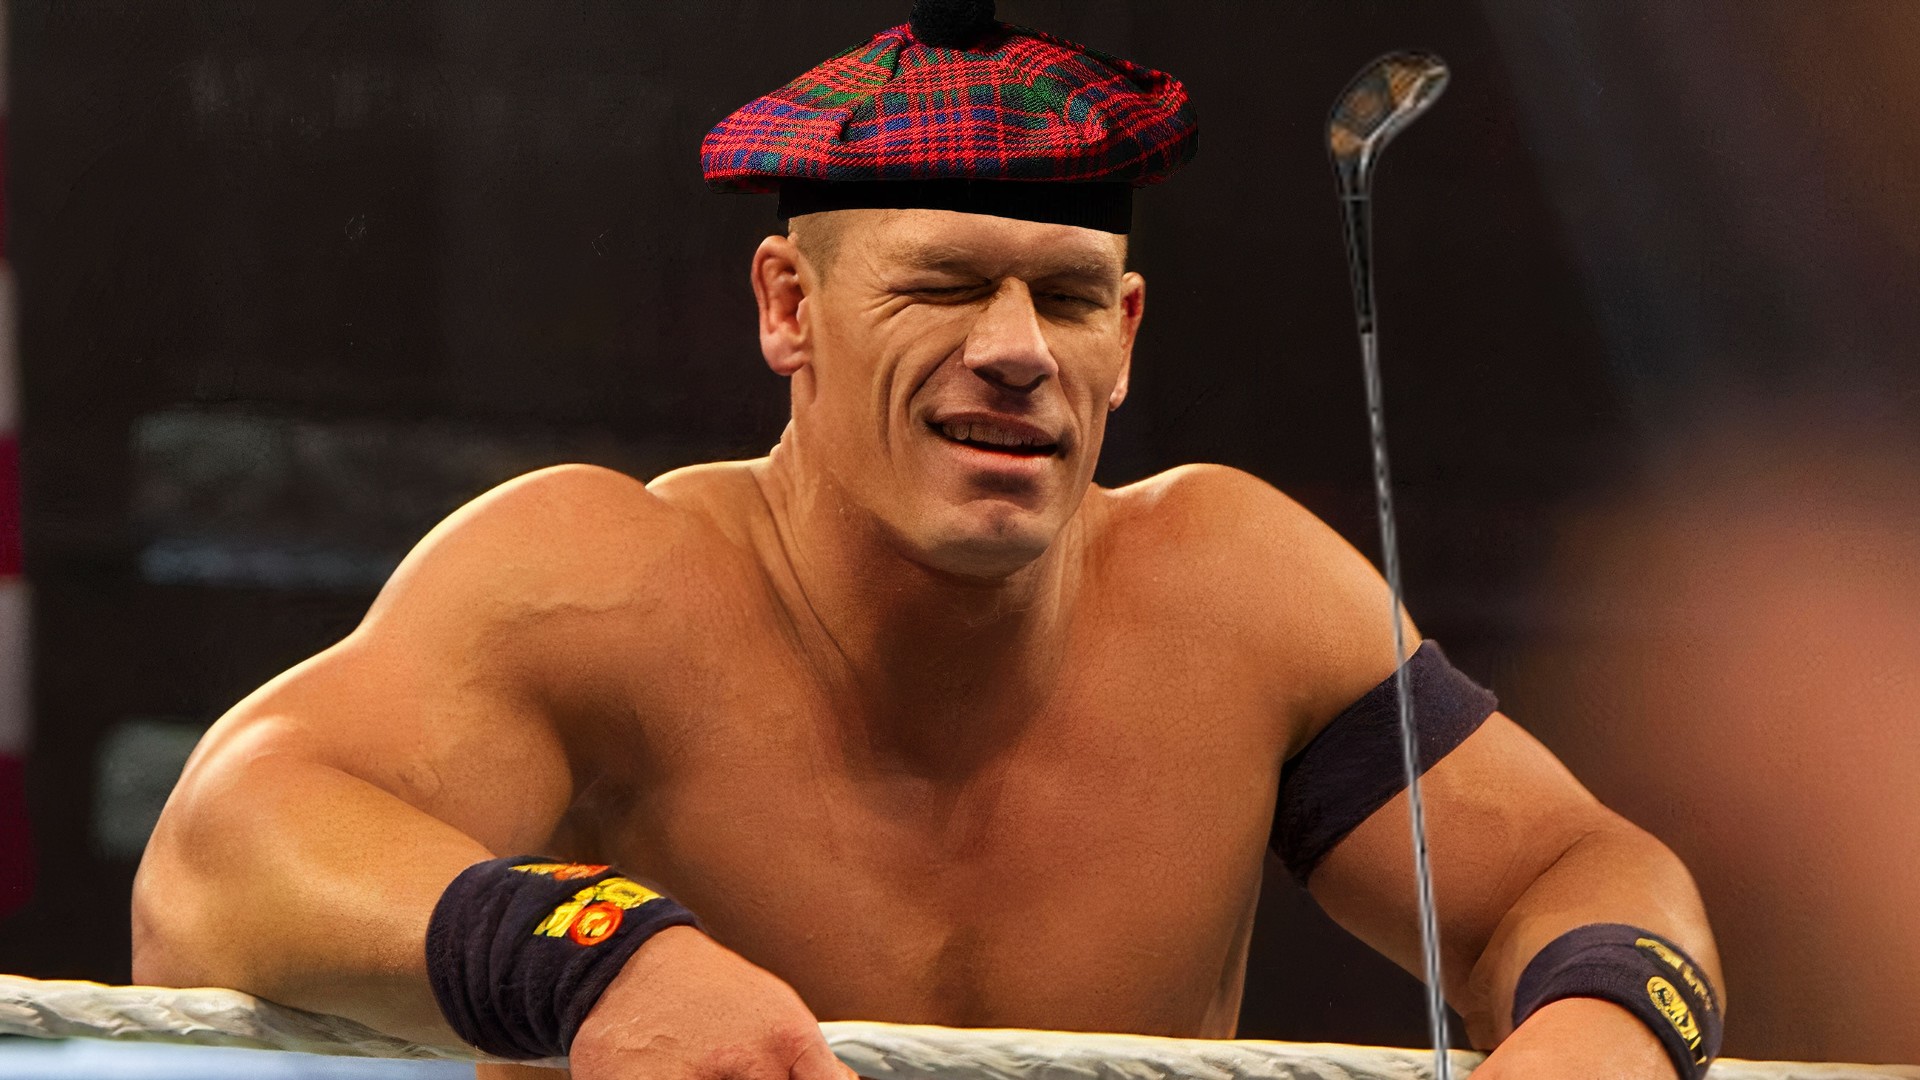 John Cena is about to destroy you at golf, because videogames